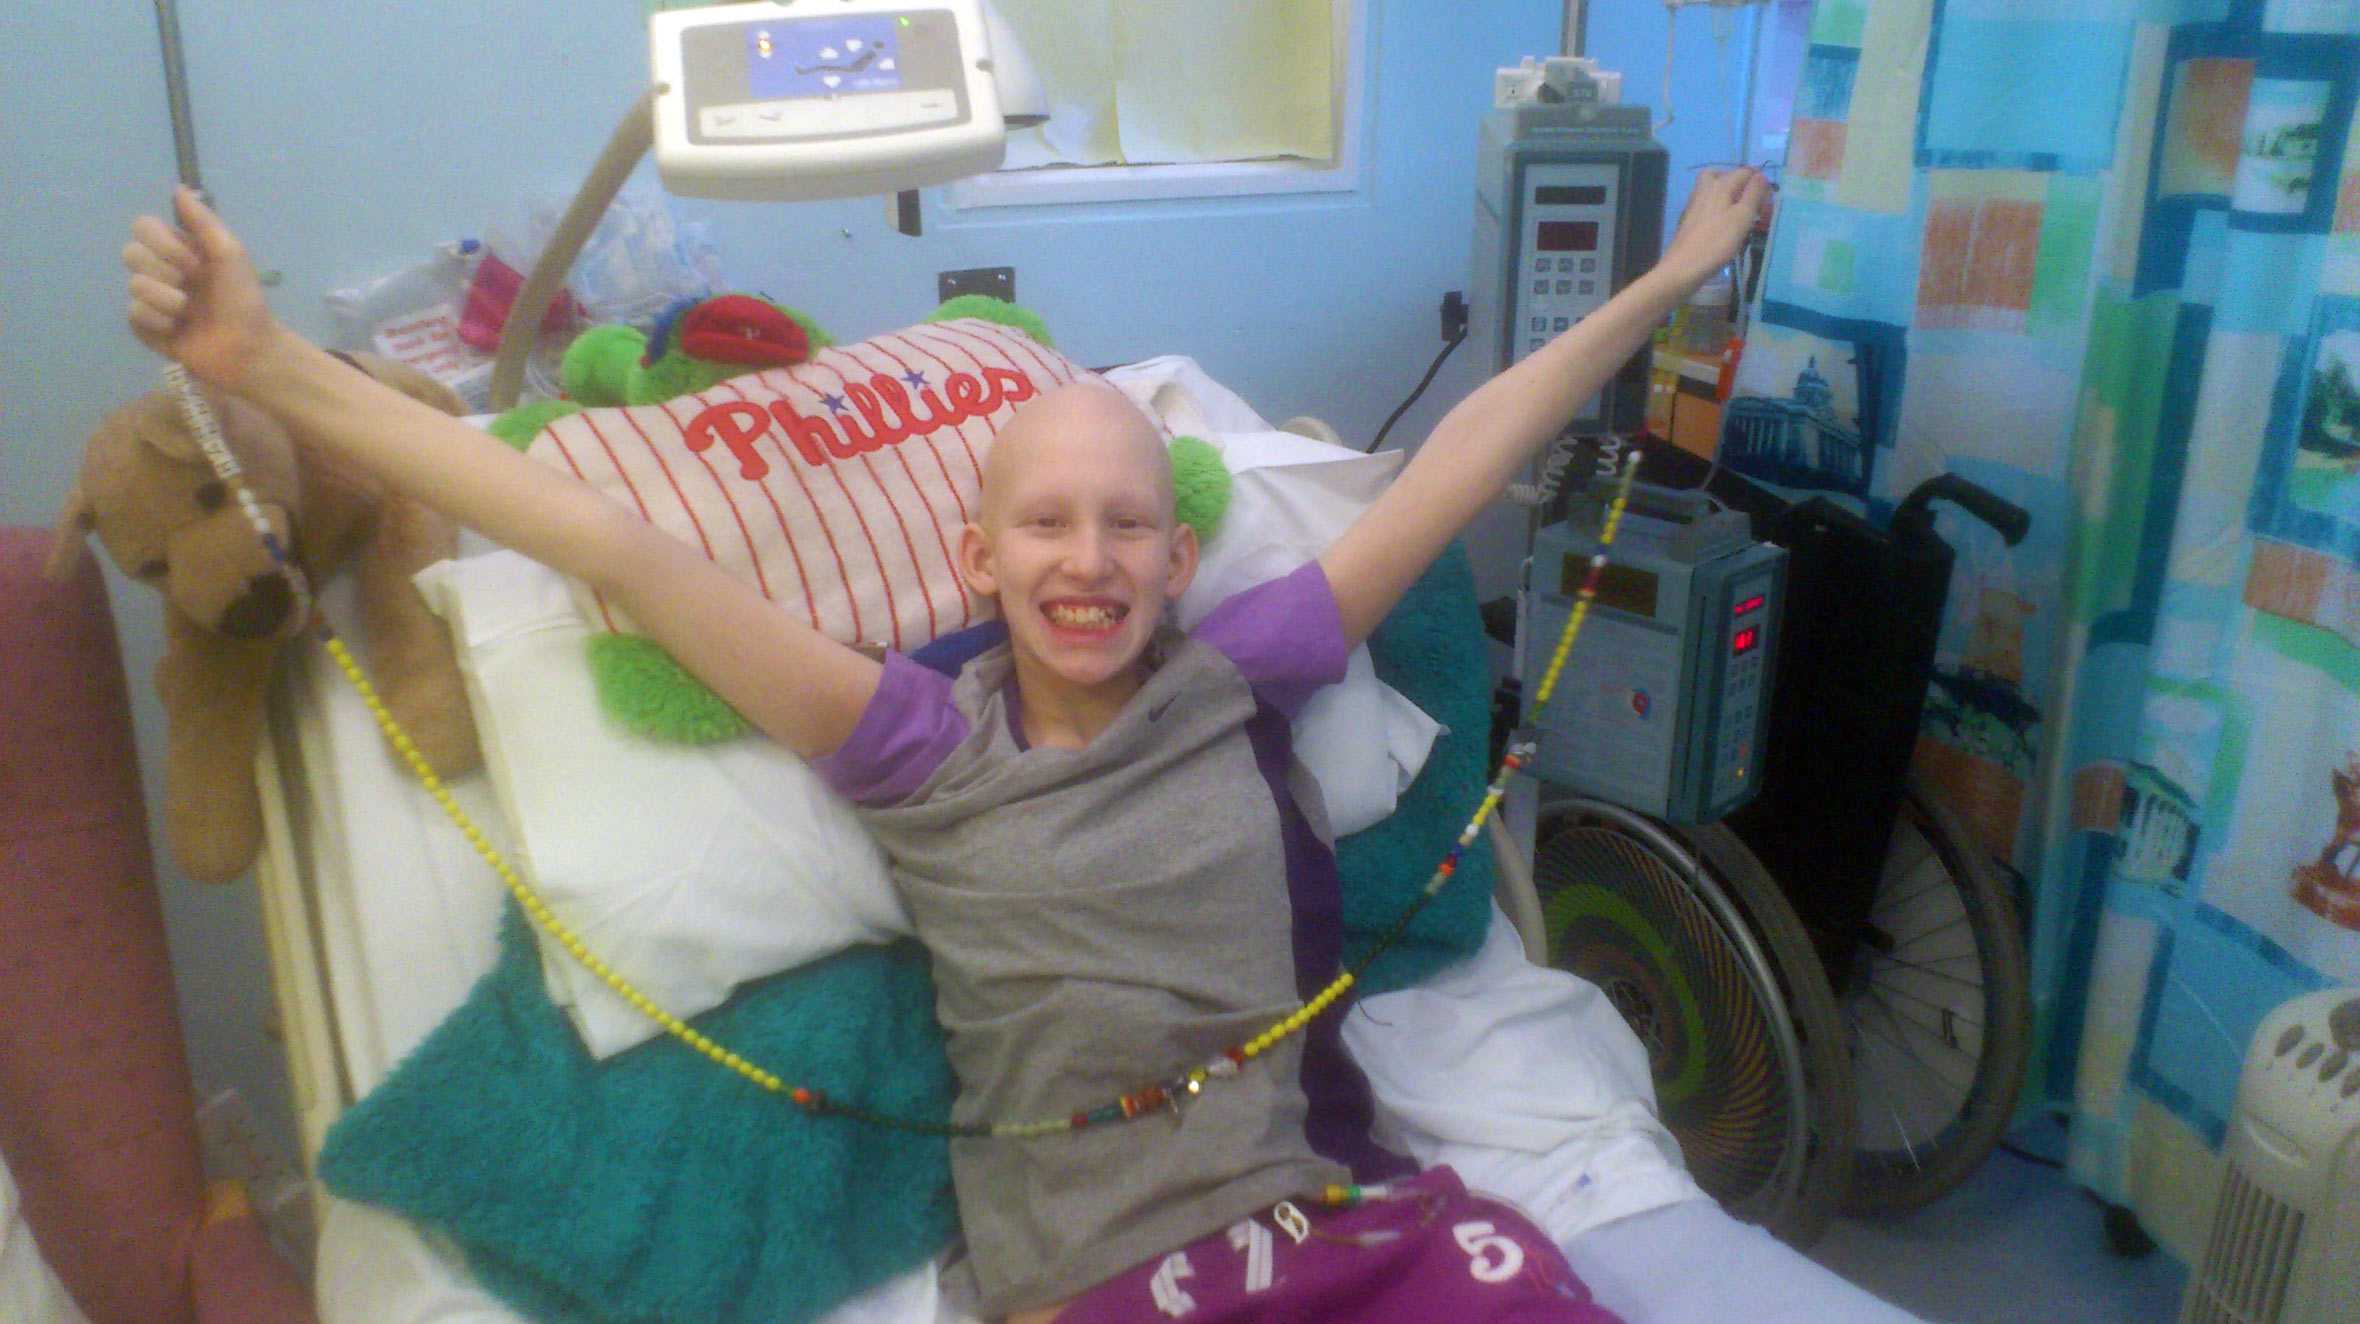 Hannah bravely smiling and holding her arms in the air, while receiving treatment in hospital.